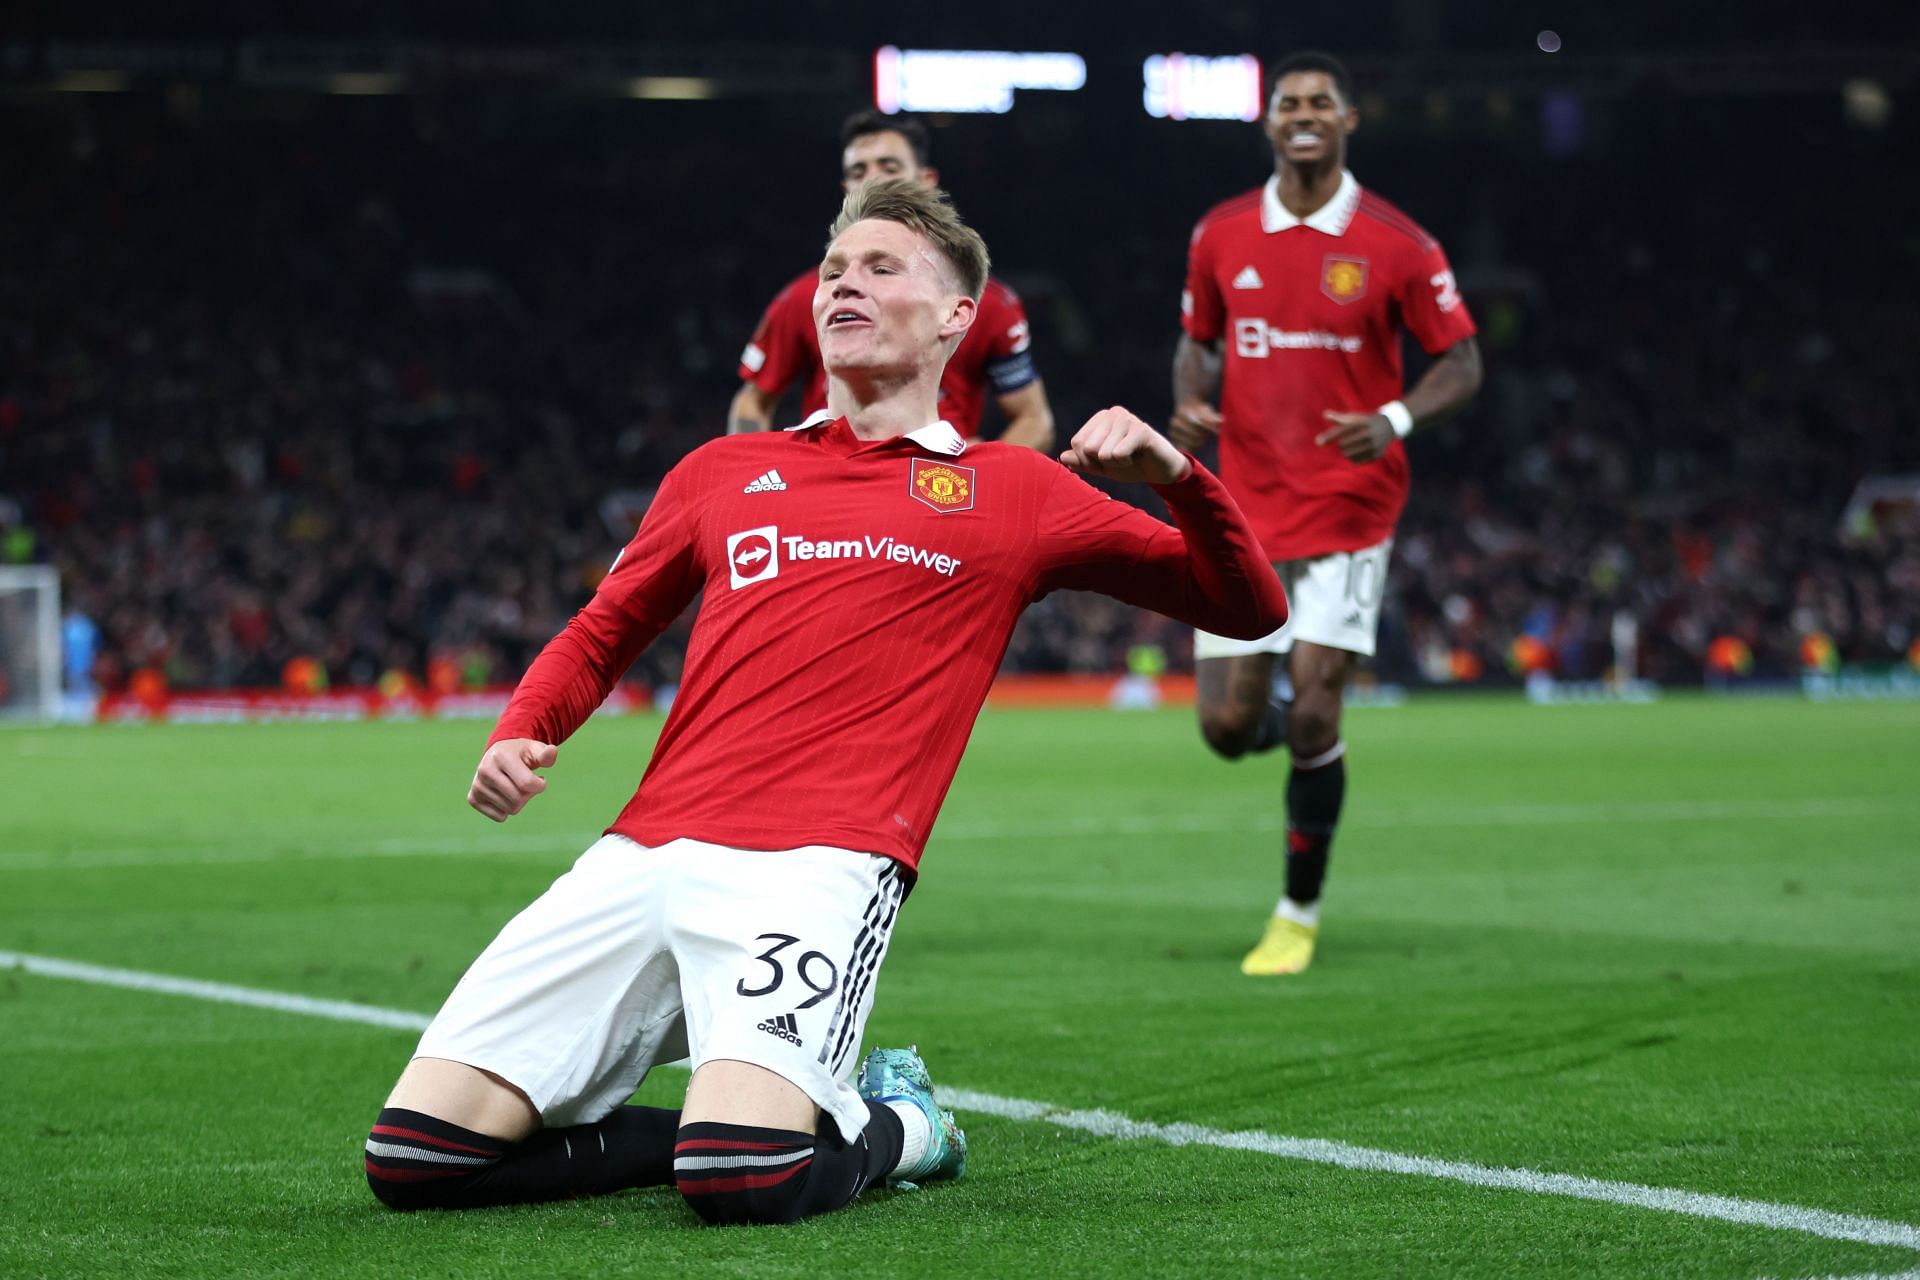 McTominay celebrating a goal for Manchester United